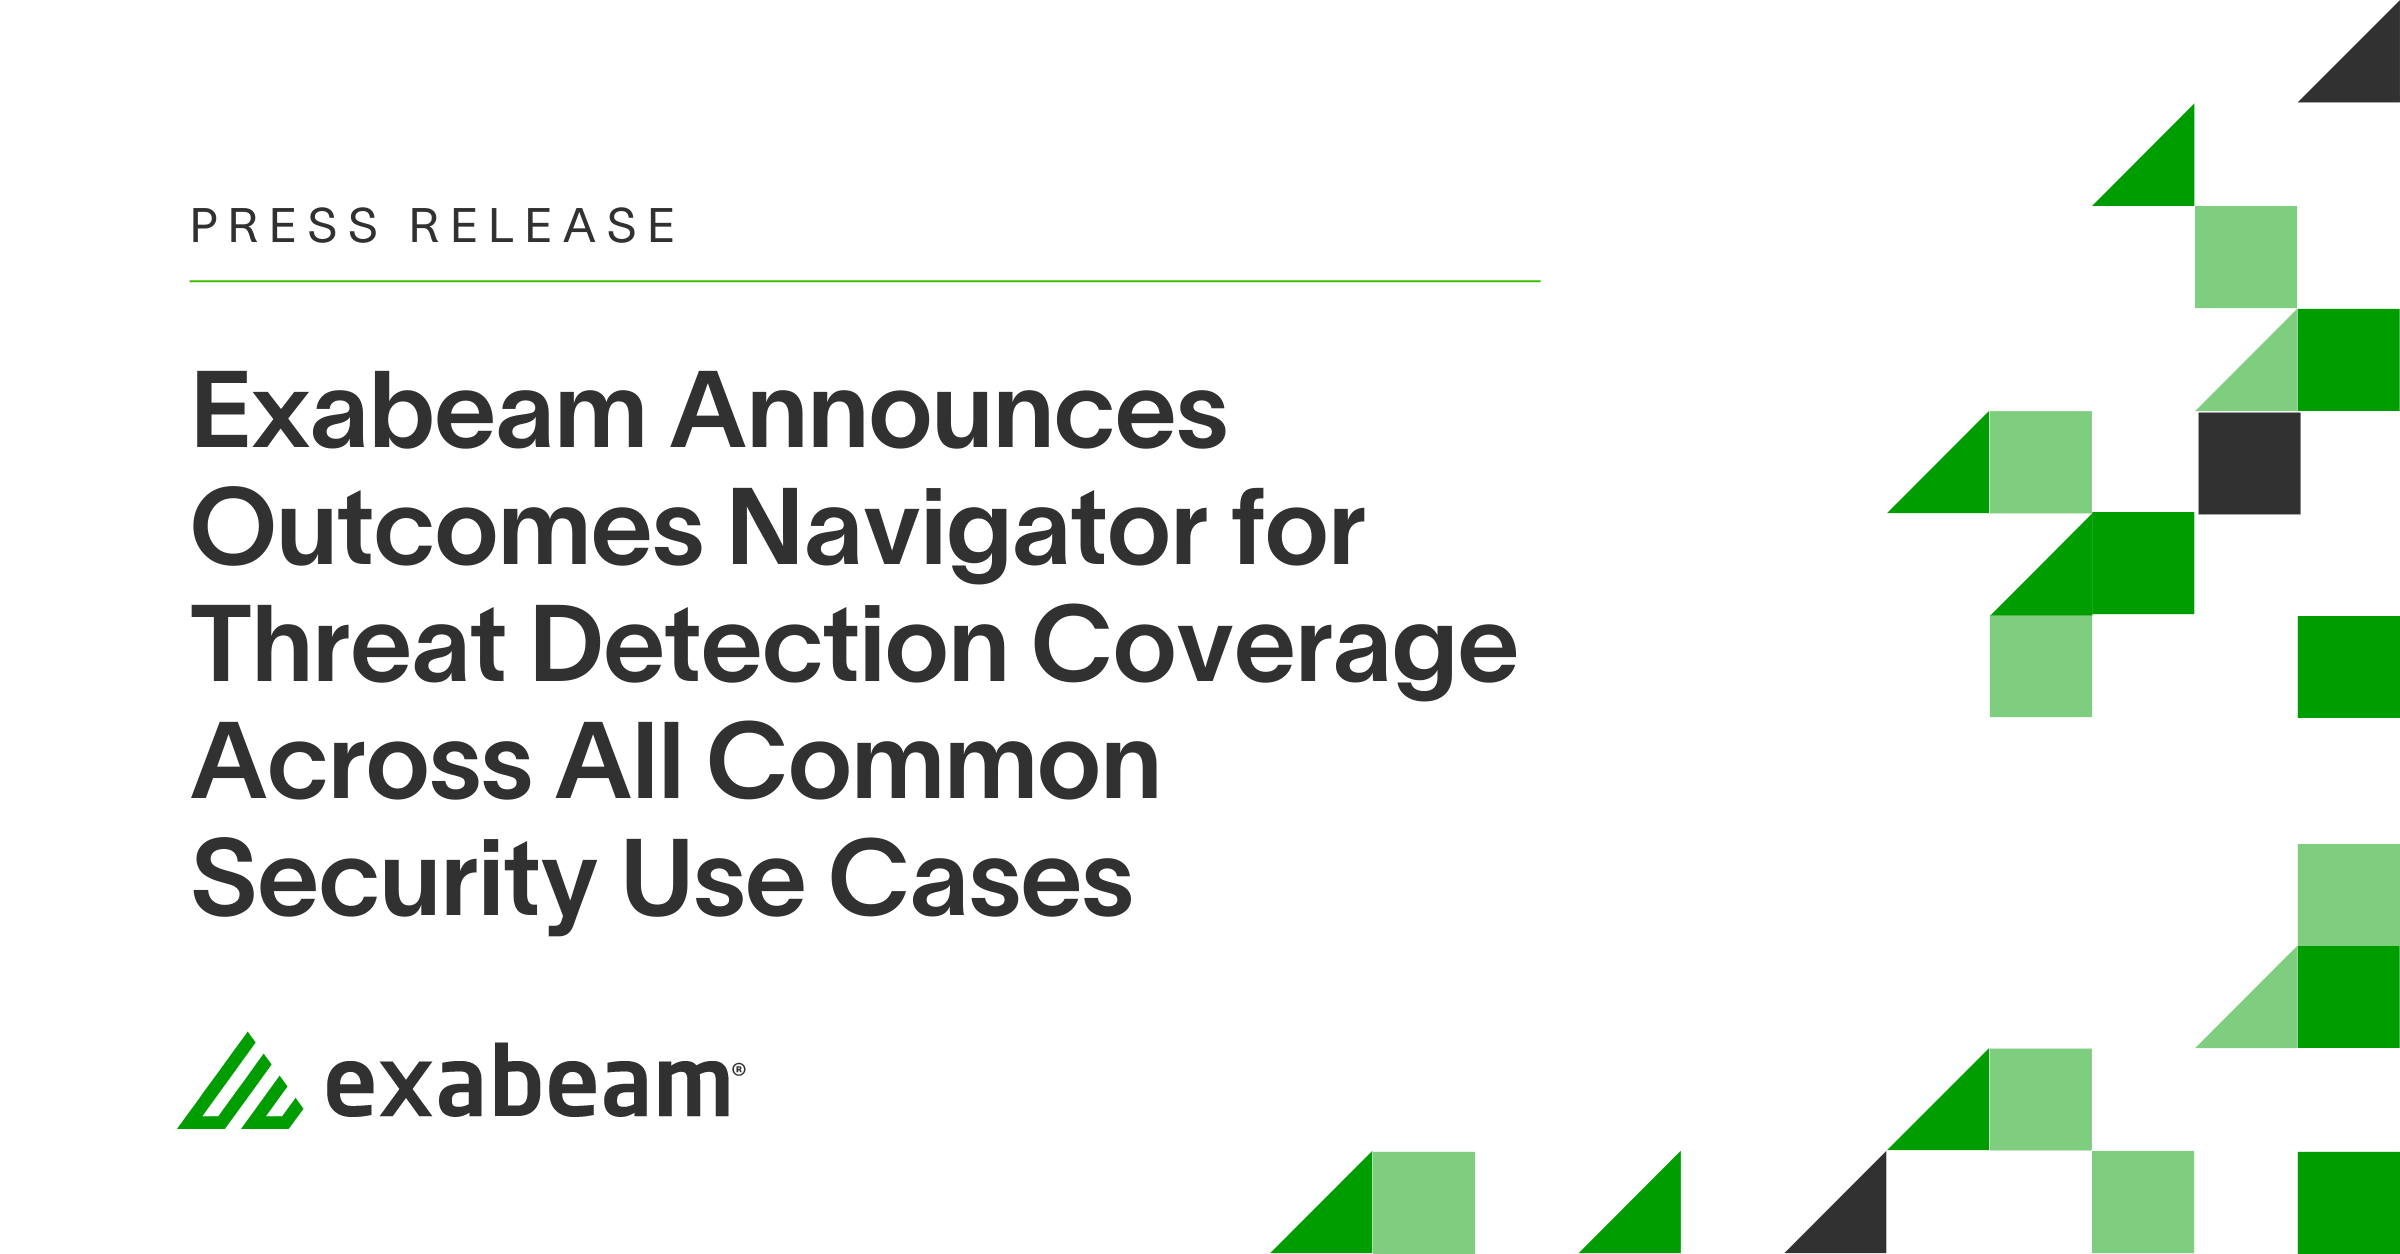 Exabeam Announces Outcomes Navigator for Threat Detection Coverage Across All Common Security Use Cases